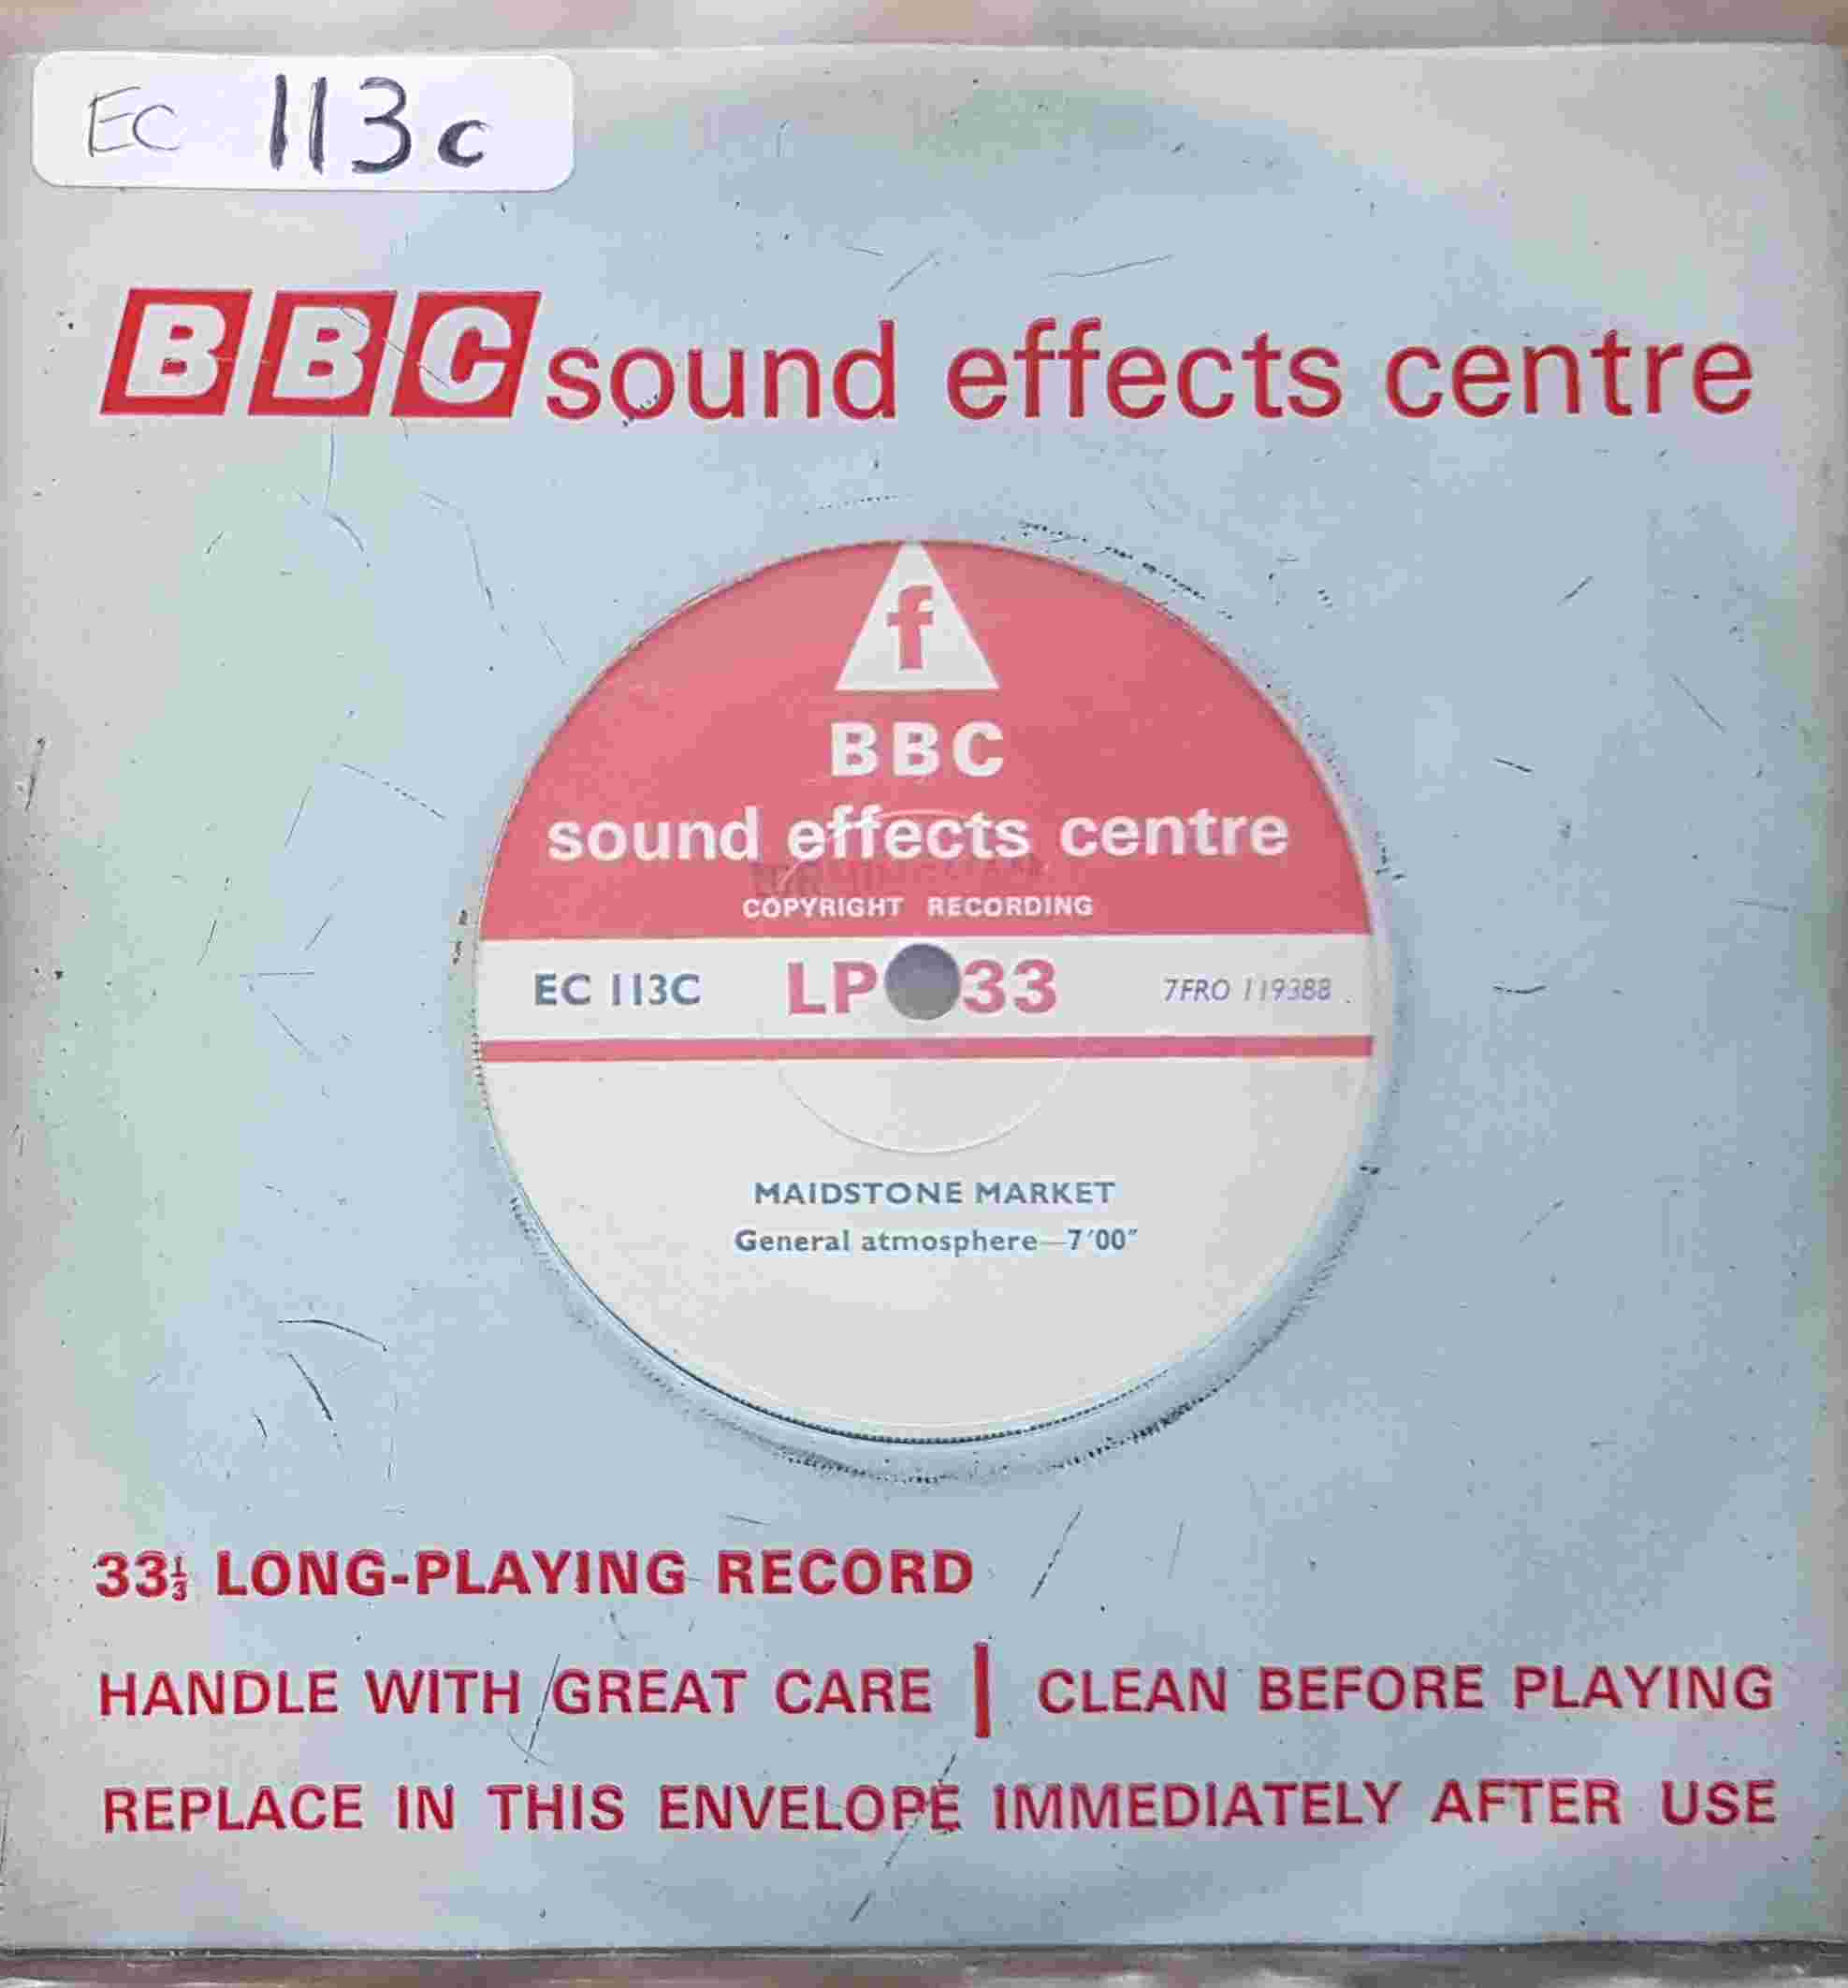 Picture of EC 113C Maidstone Market / Pontypridd Market by artist Not registered from the BBC singles - Records and Tapes library